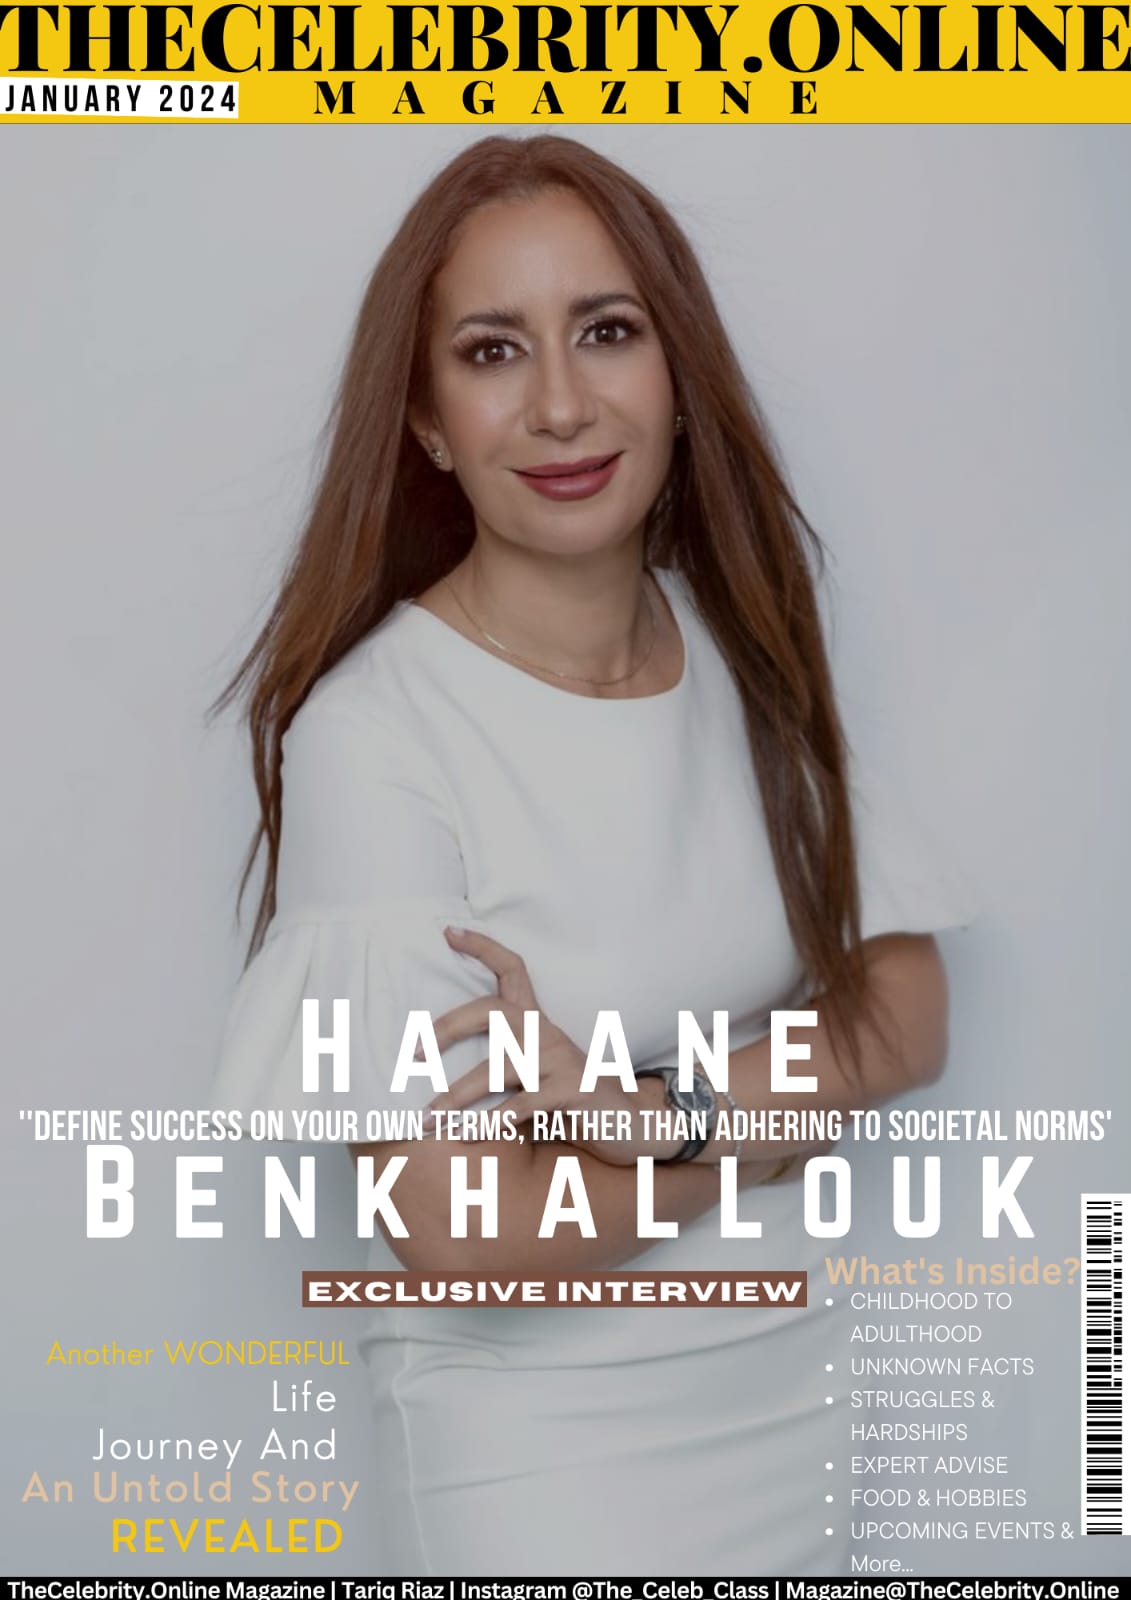 Hanane Benkhallouk Interview – ‘Define Success On Your Own Terms, Rather Than Adhering To Societal Norms’